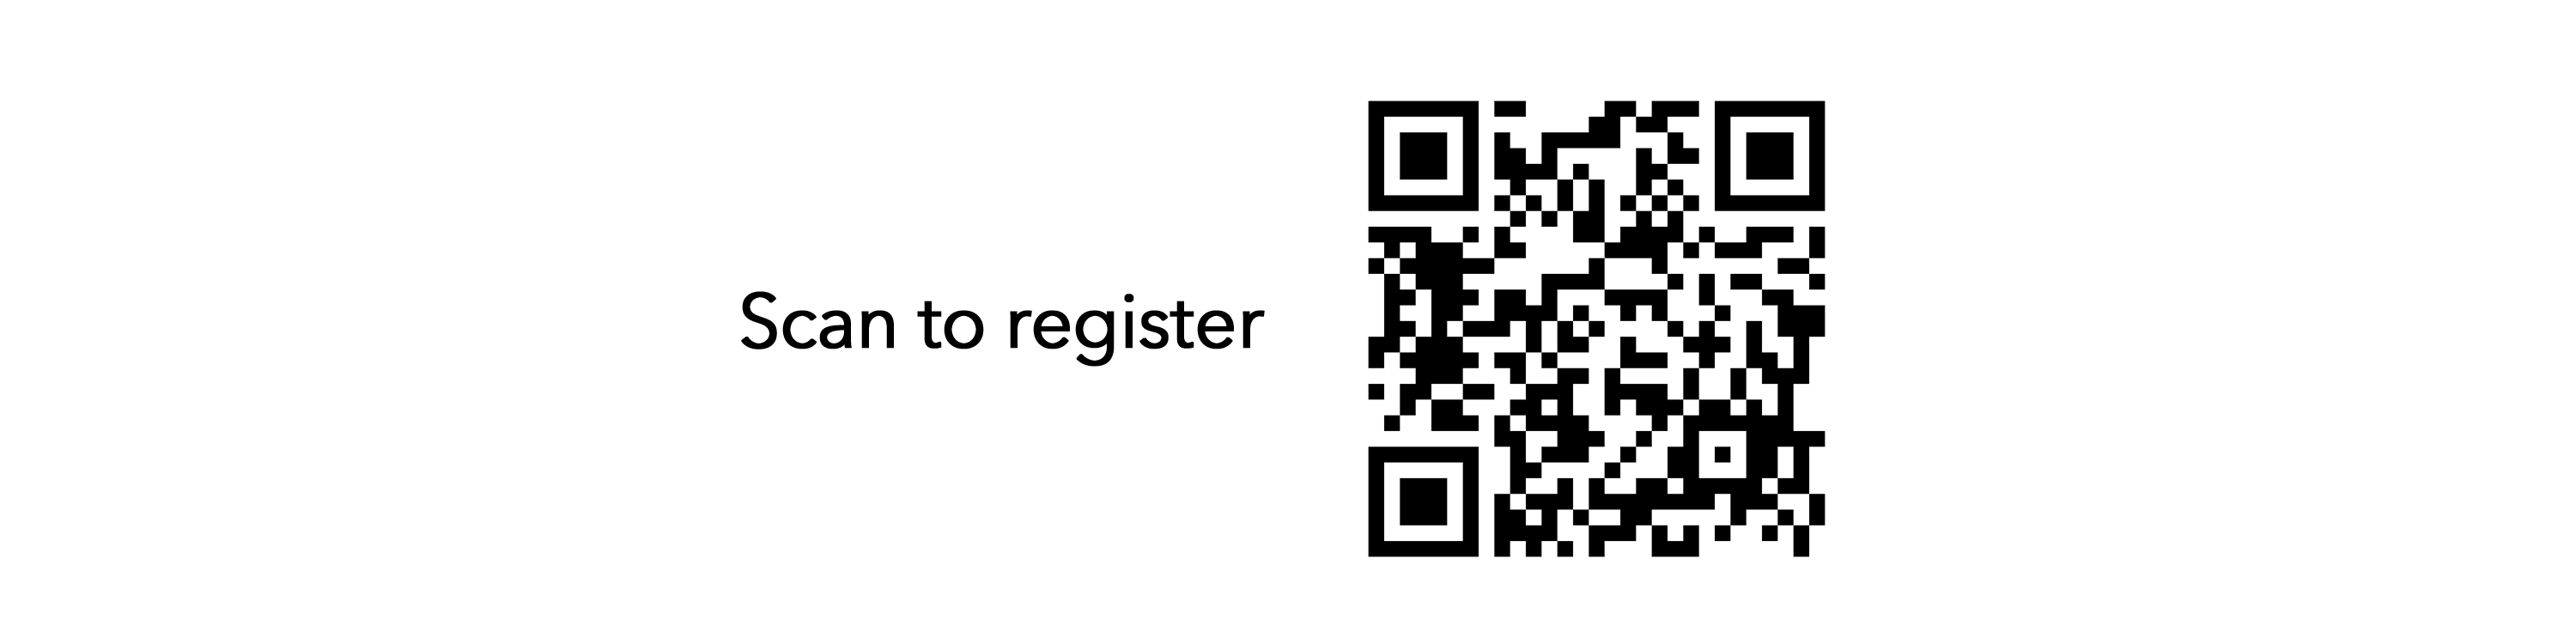 QR code to register for the book launch